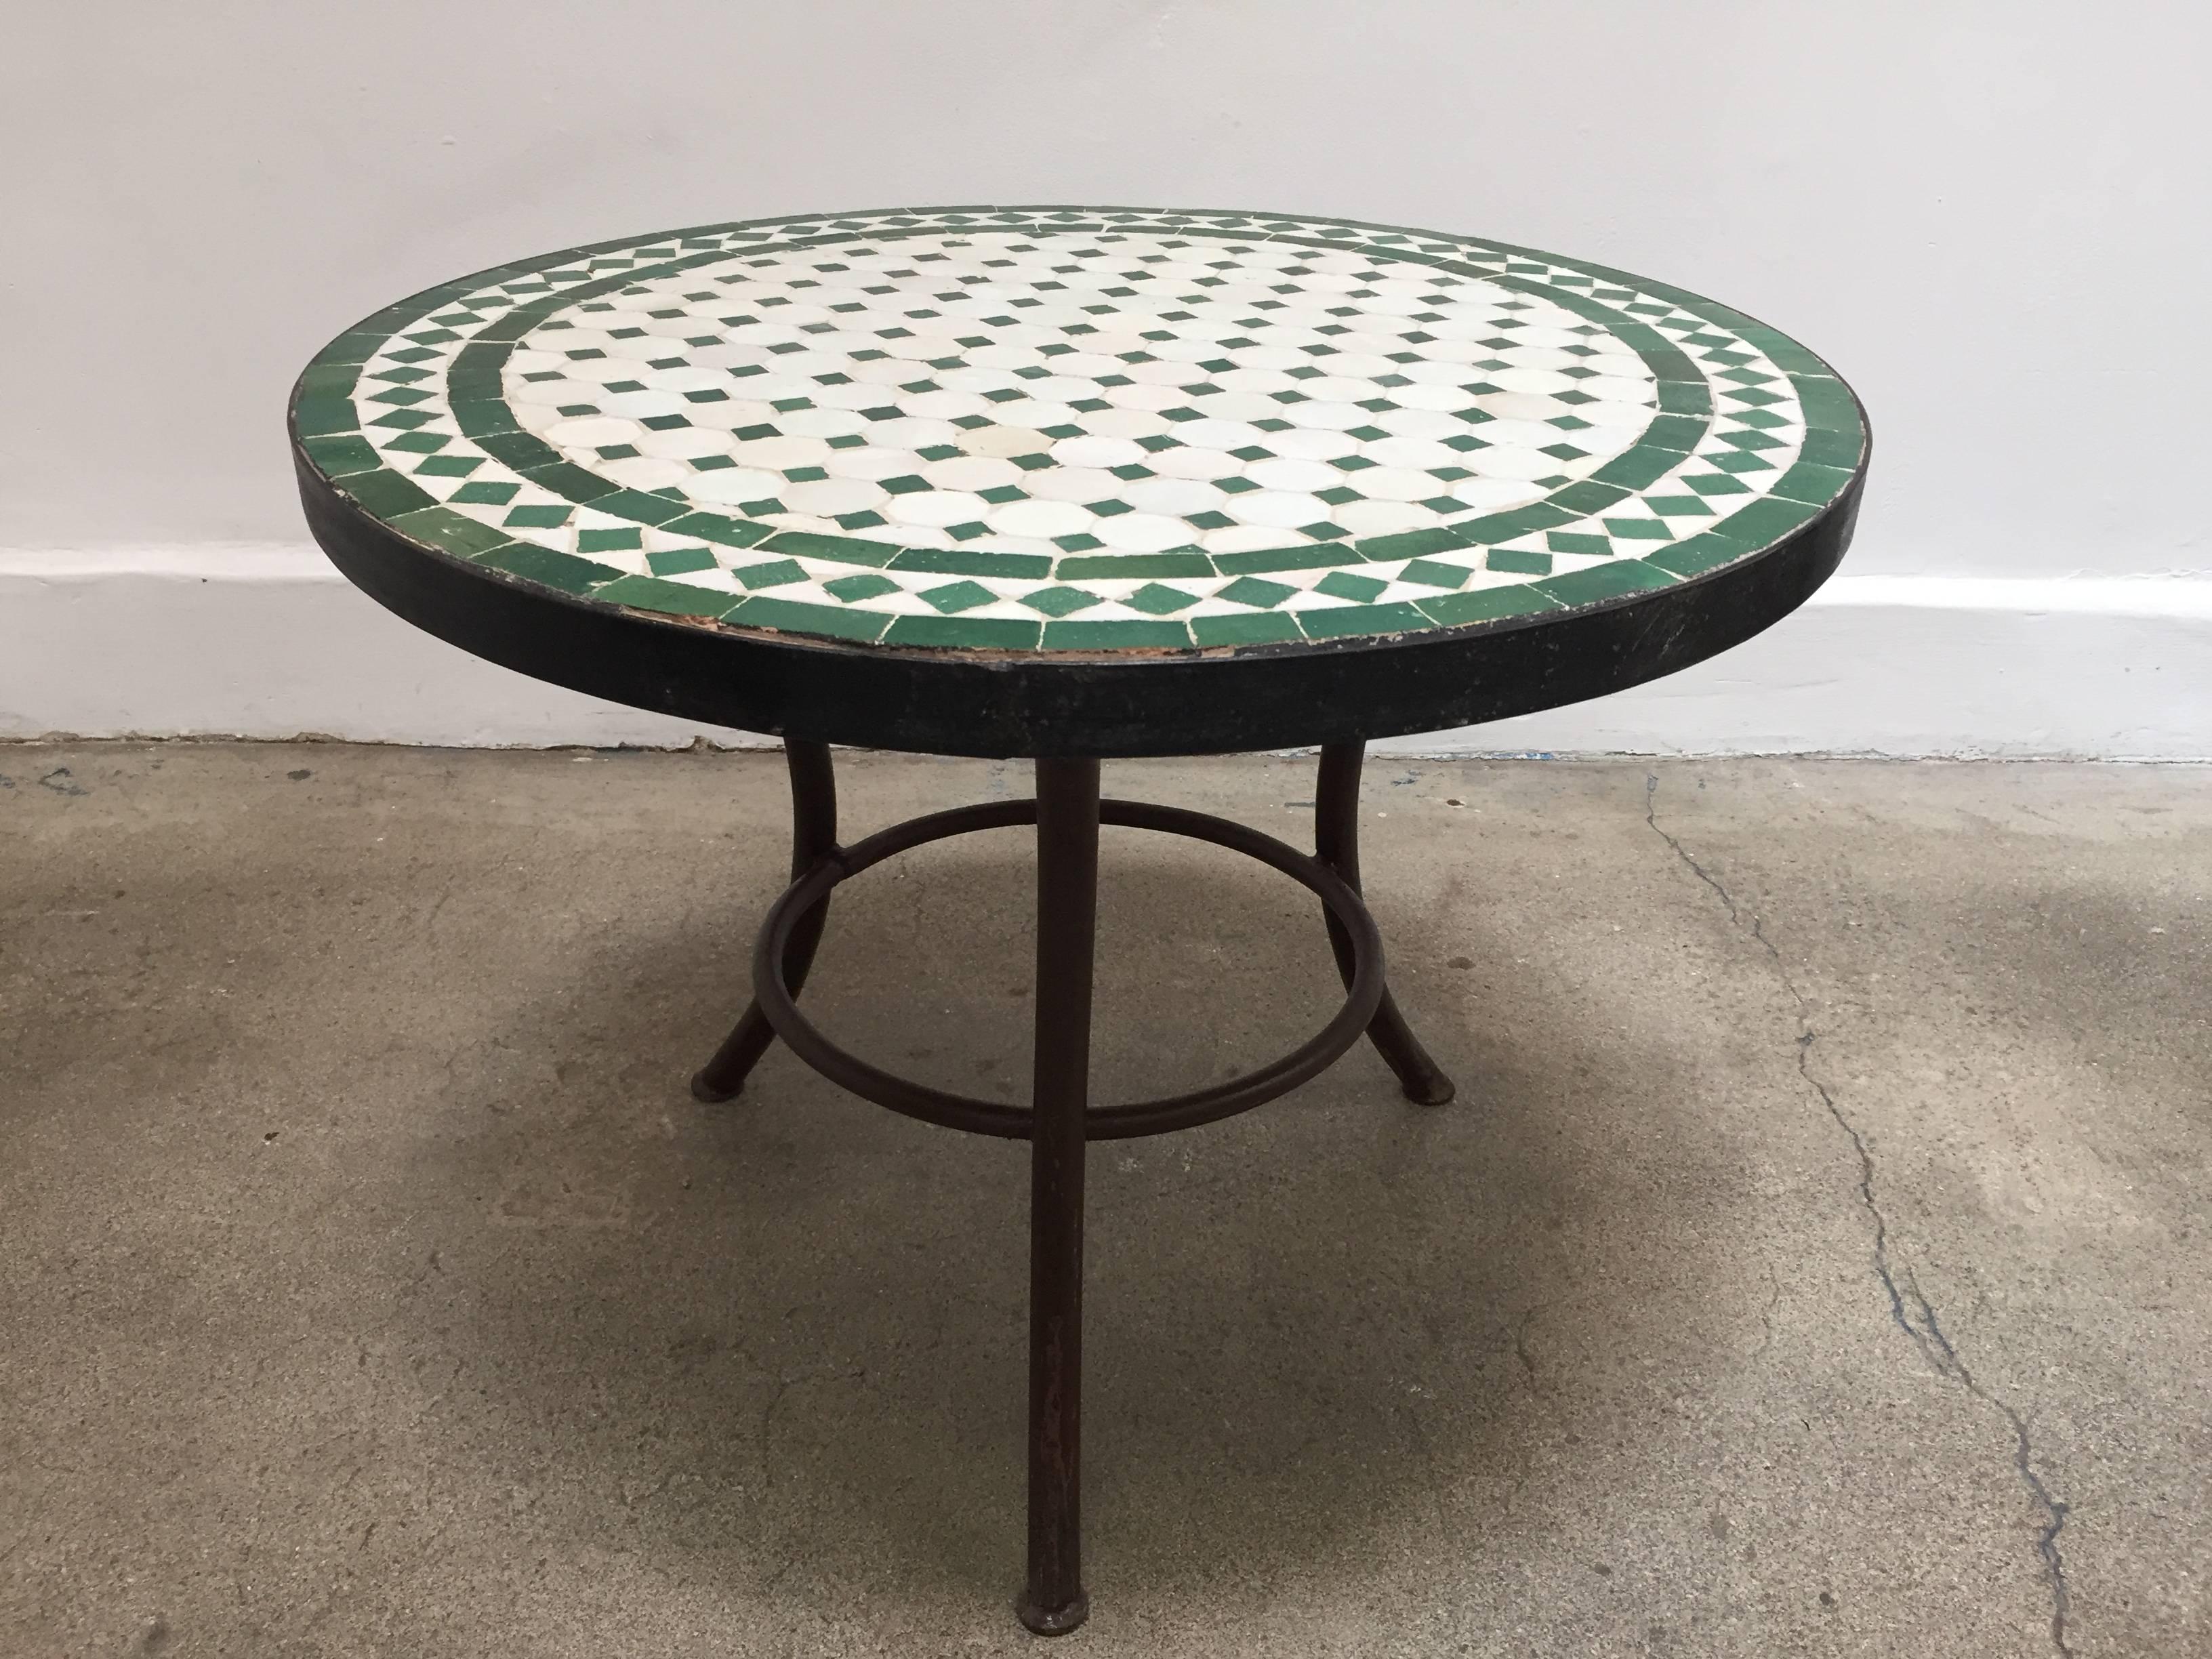 Moroccan mosaic tile table on low iron base. 
Handmade by expert artisans in Fez, Morocco using reclaimed old glazed tiles inlaid in concrete and making beautiful geometrical designs, colors are green and white. 
These tables could be used indoor or